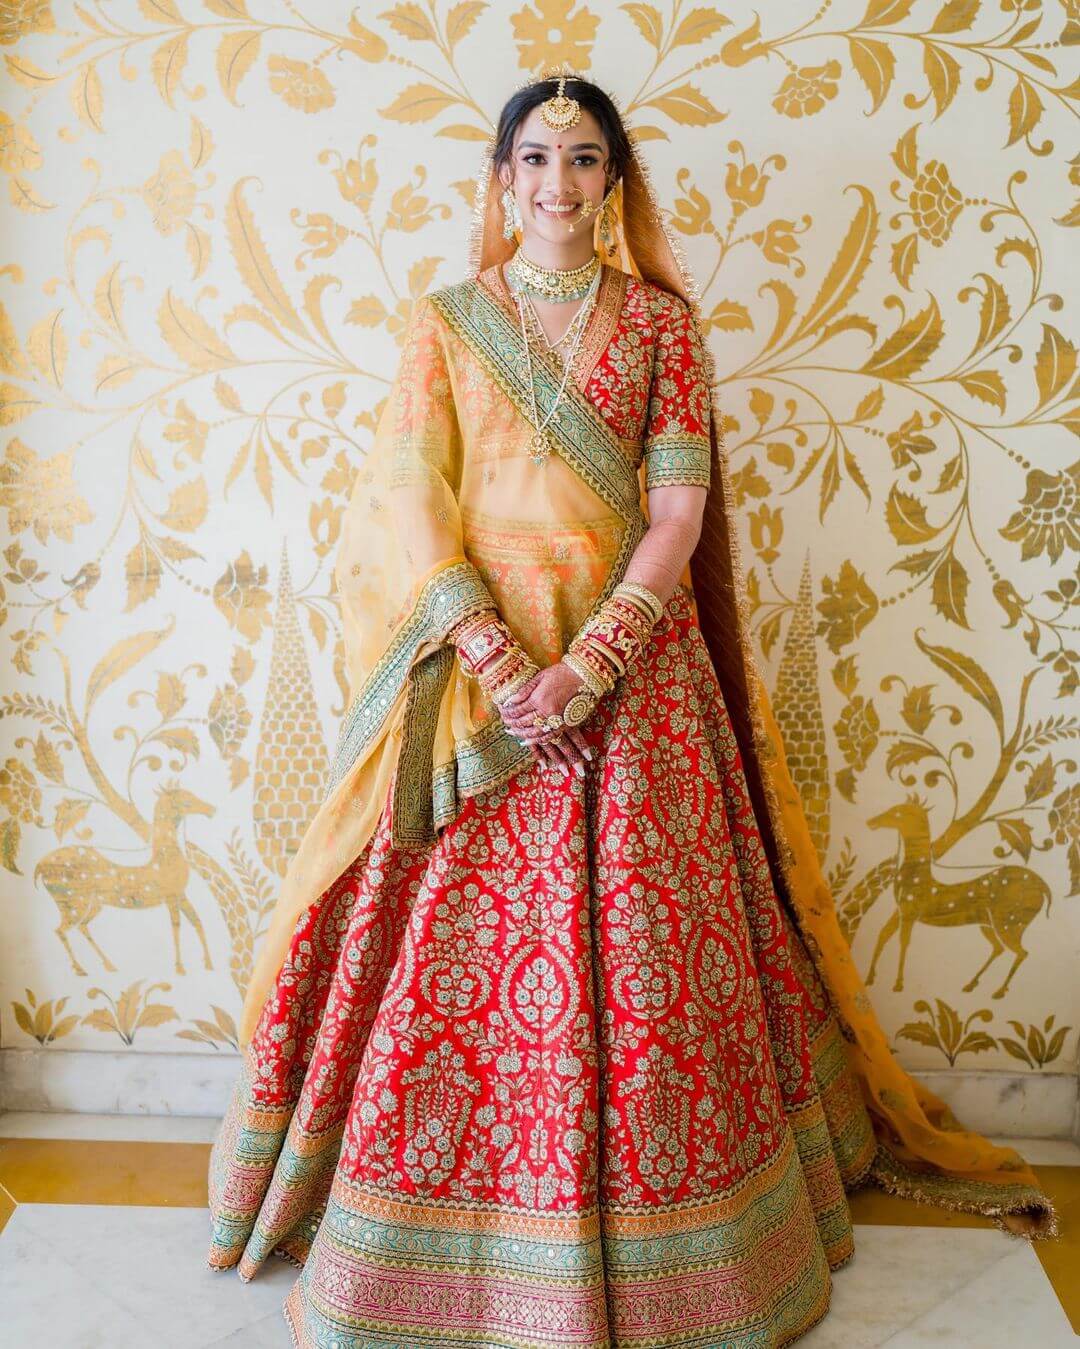 The Brightest Red Floral Lehenga Stunning Sabyasachi Lehengas Spotted On Real Brides